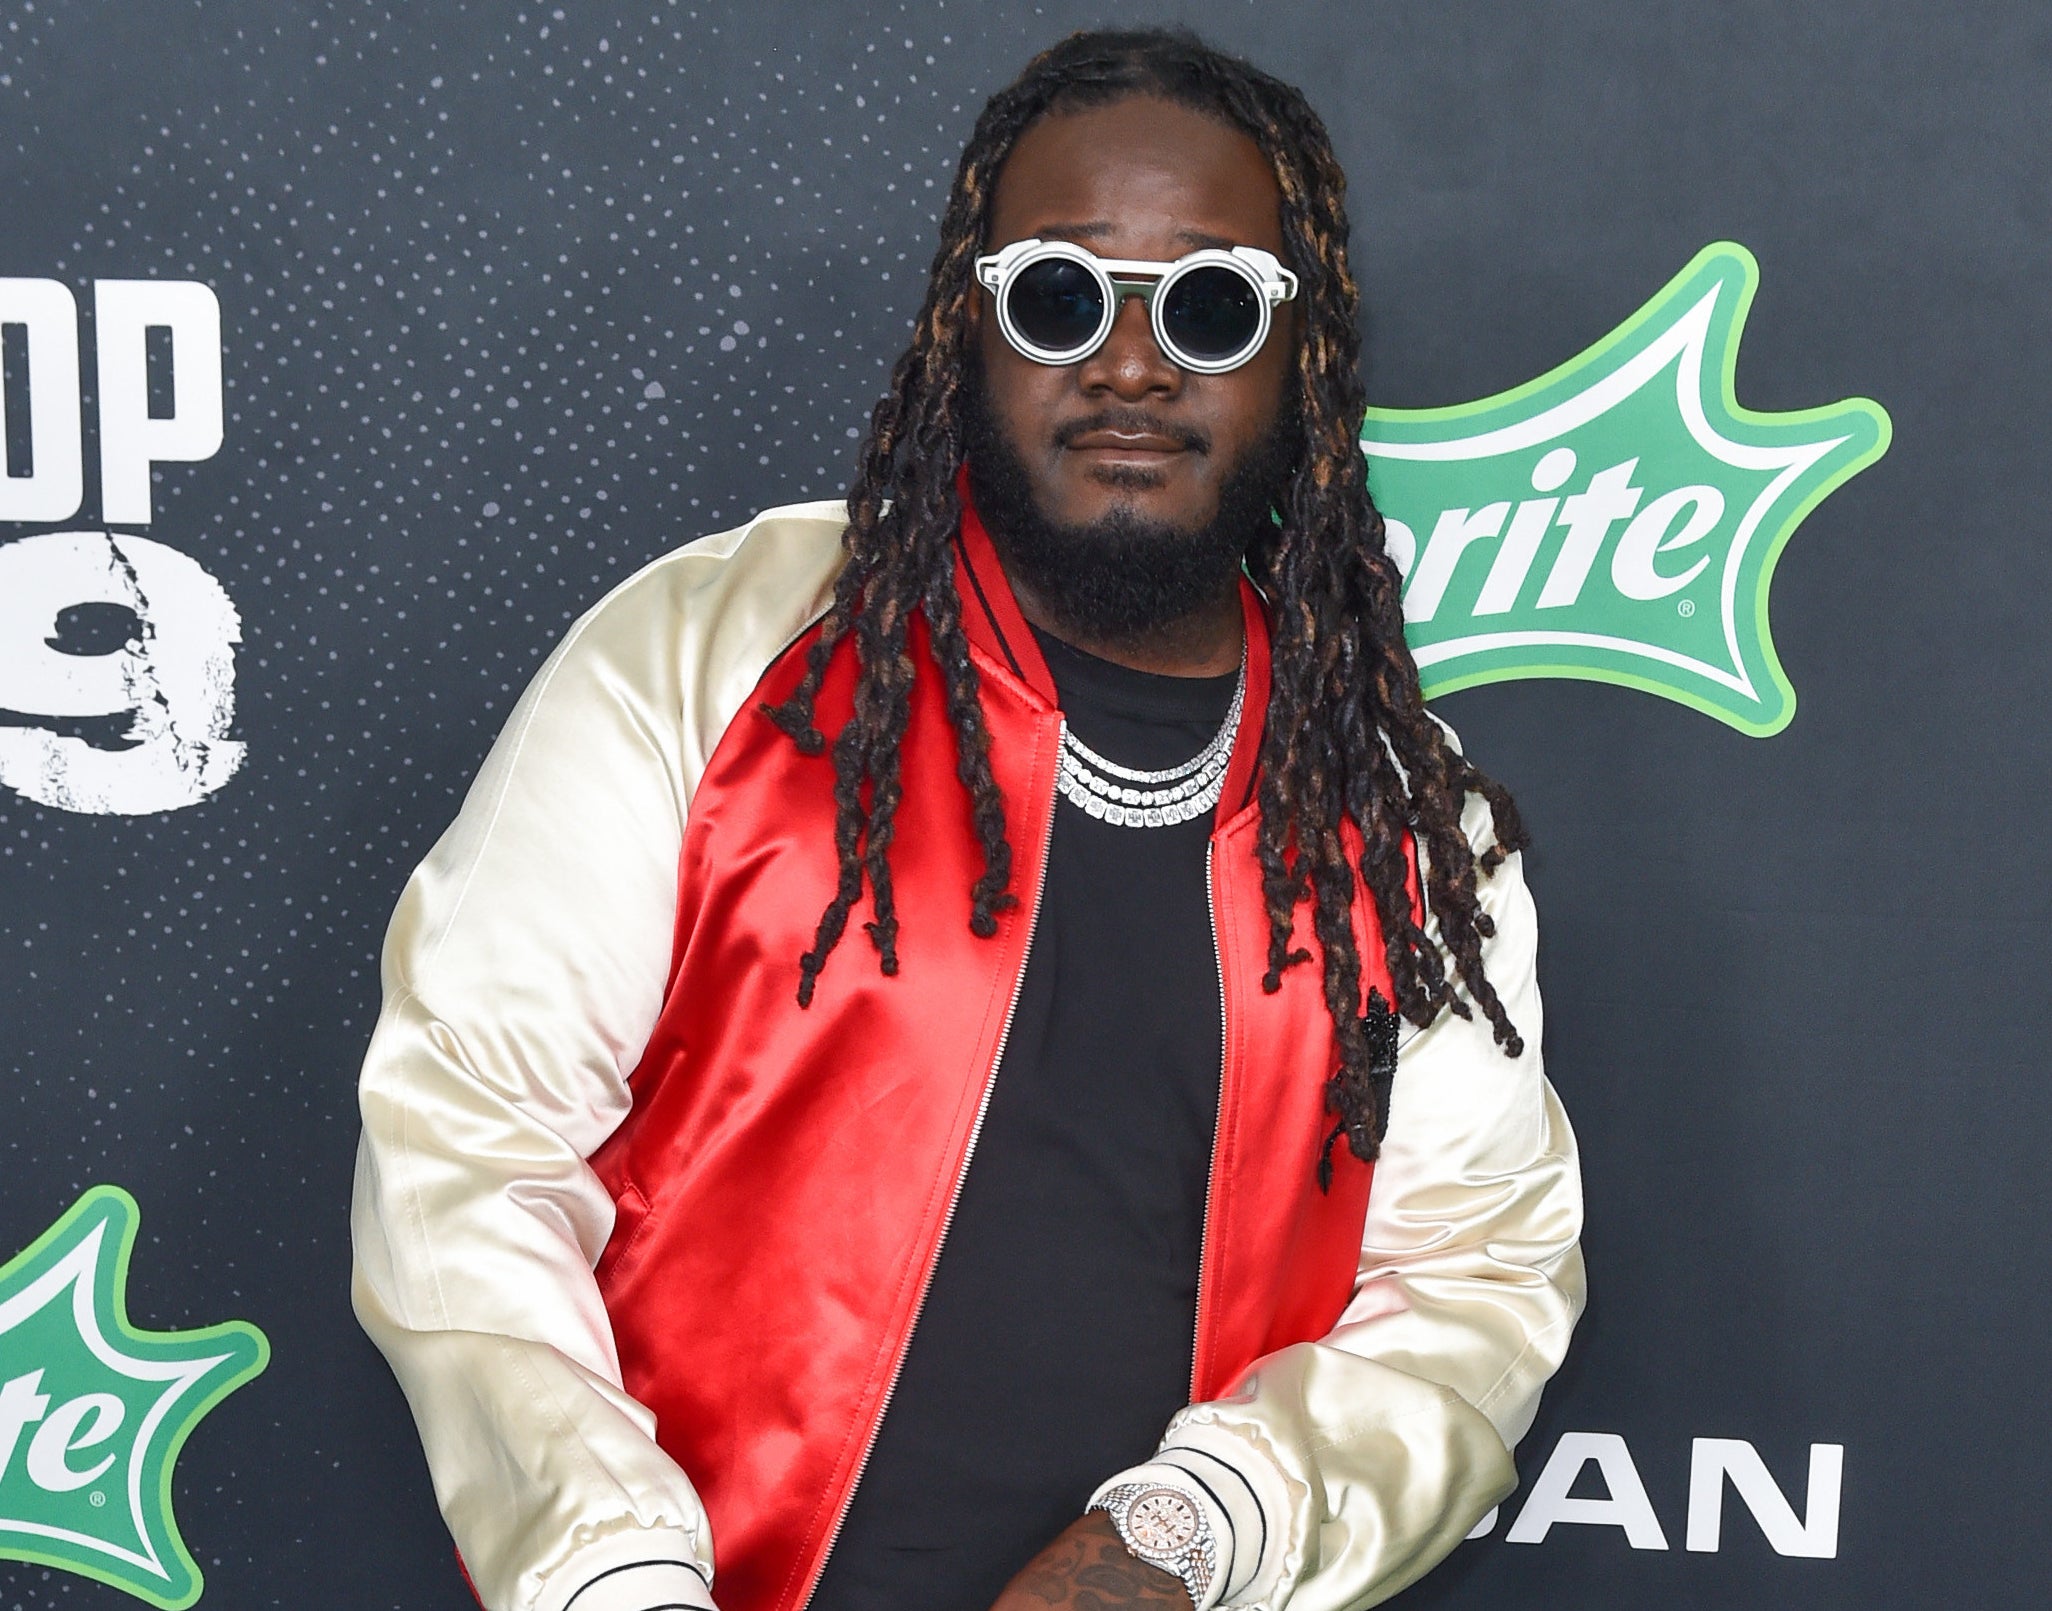 T-pain wears sunglasses and a red and gold varsity jacket to a red carpet